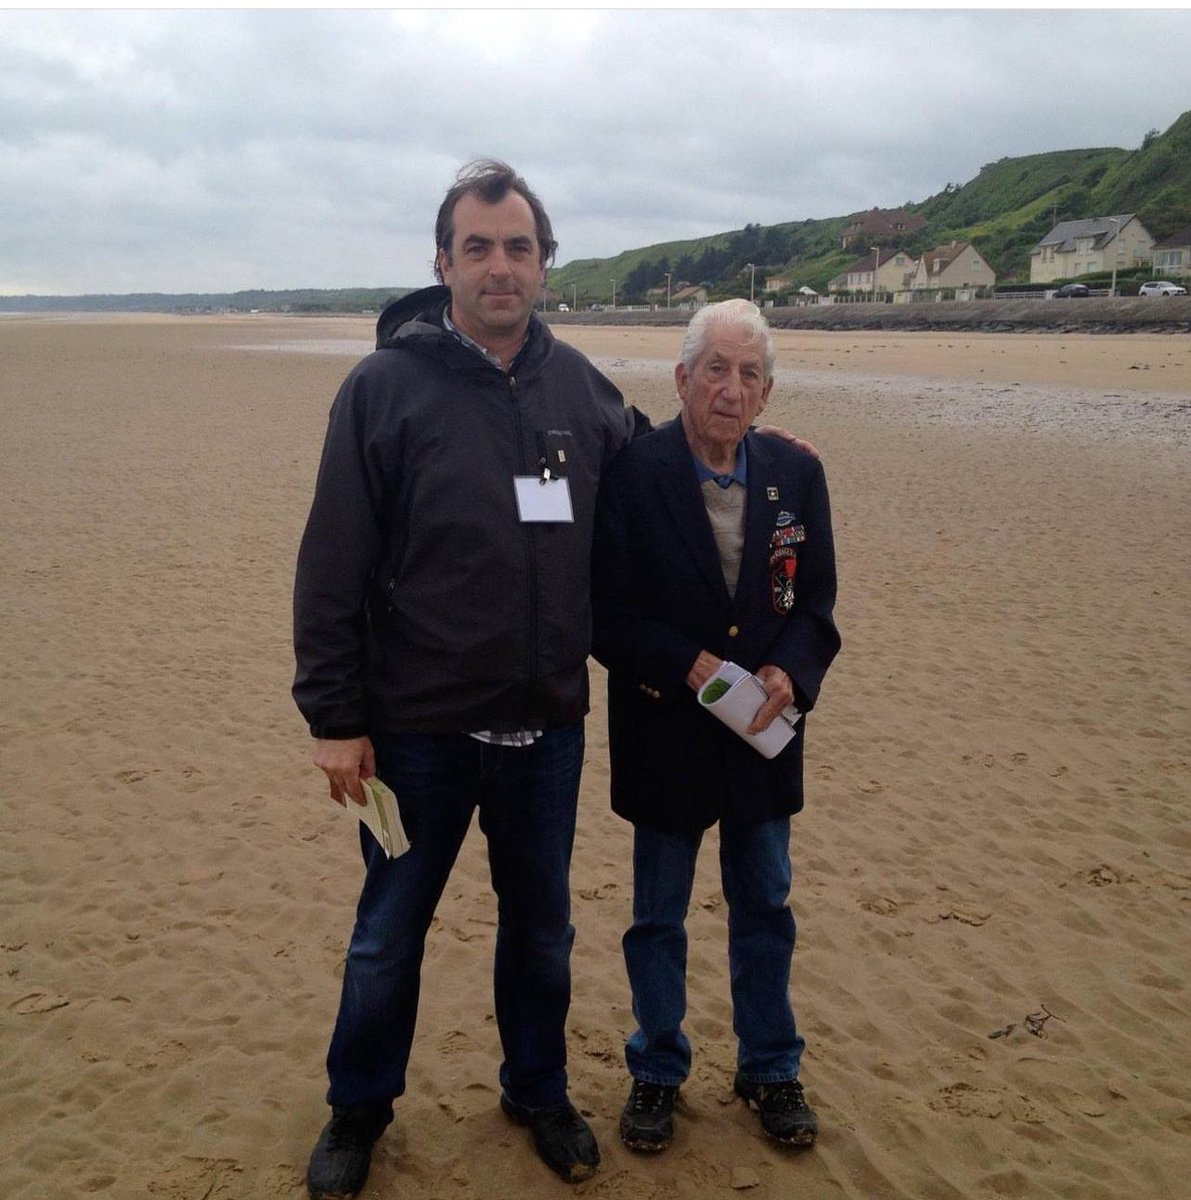 Countdown to D Day 80. With Dan Farley, A Co., 5th Rangers, where he fought on Omaha. He did not say a word a decade ago as he crossed the sands. RIP Dan.